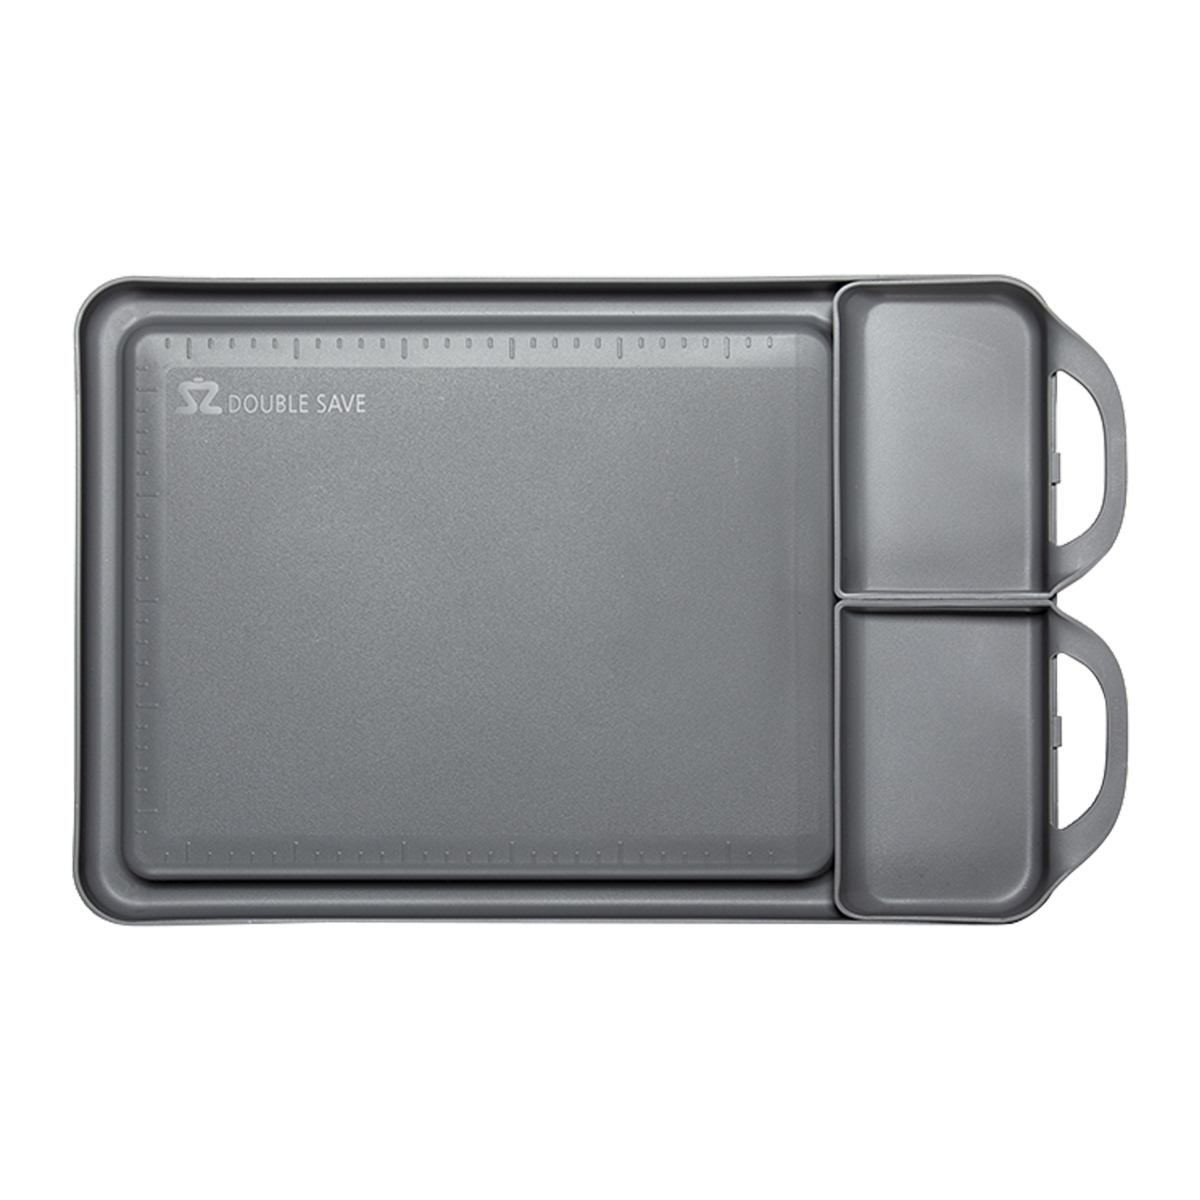 Jmg-b300s Non-slip Right Side Removable Compartments With Grooves & Serving Tray, Gray